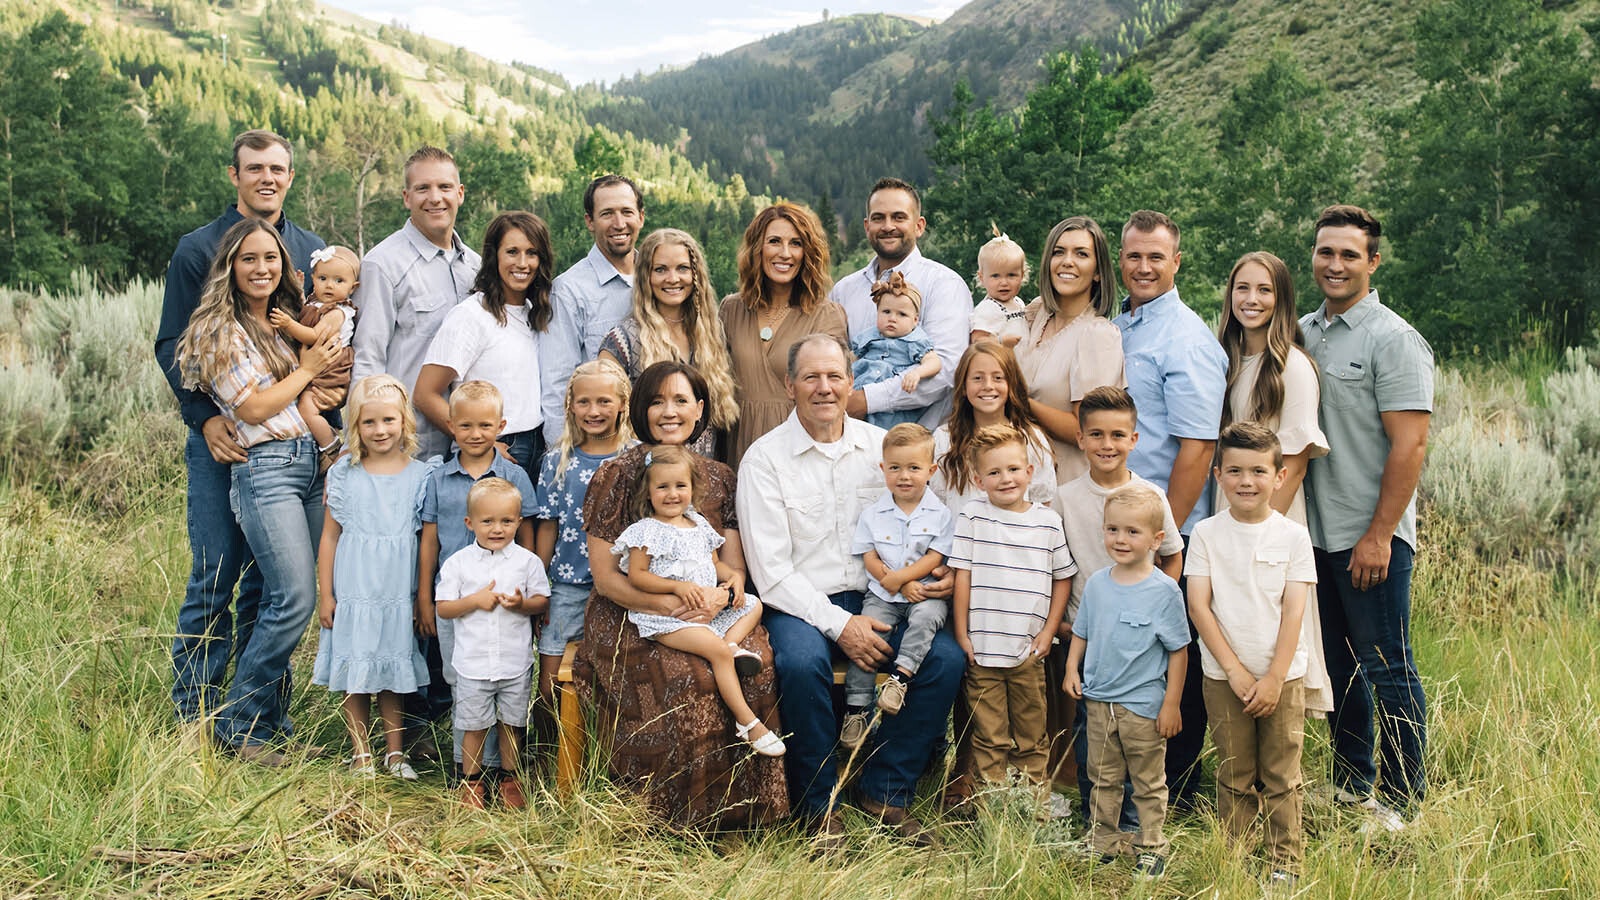 Stewart Petersen and his wife, Chemene, pose with their six married children and 15 grandchildren.